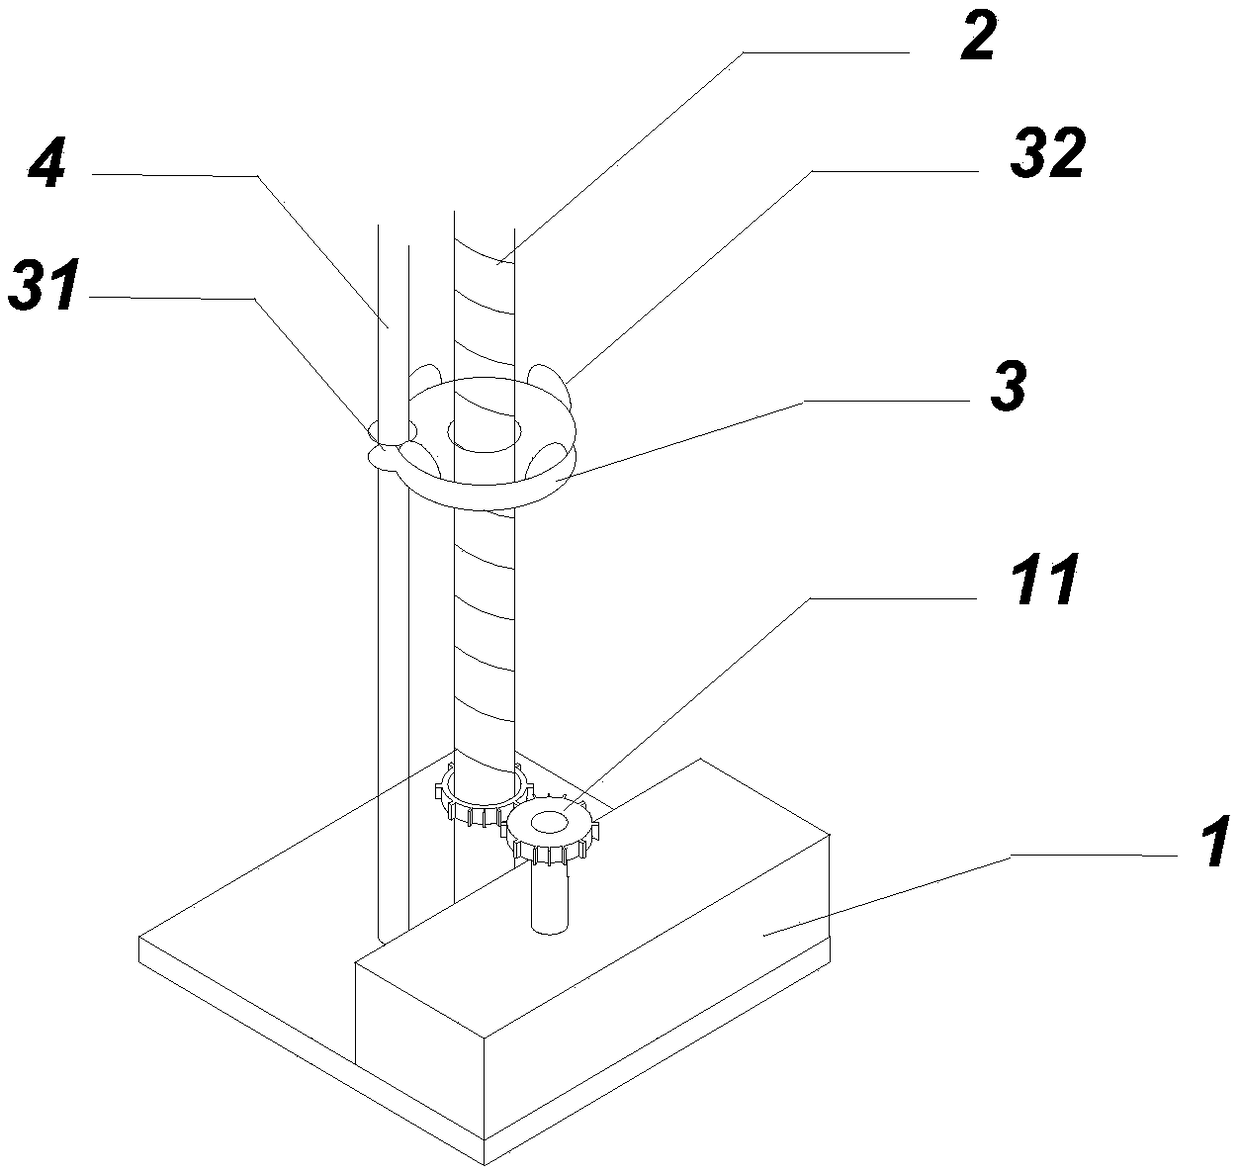 Loading and hanging device applied to electric iron tower shared equipment